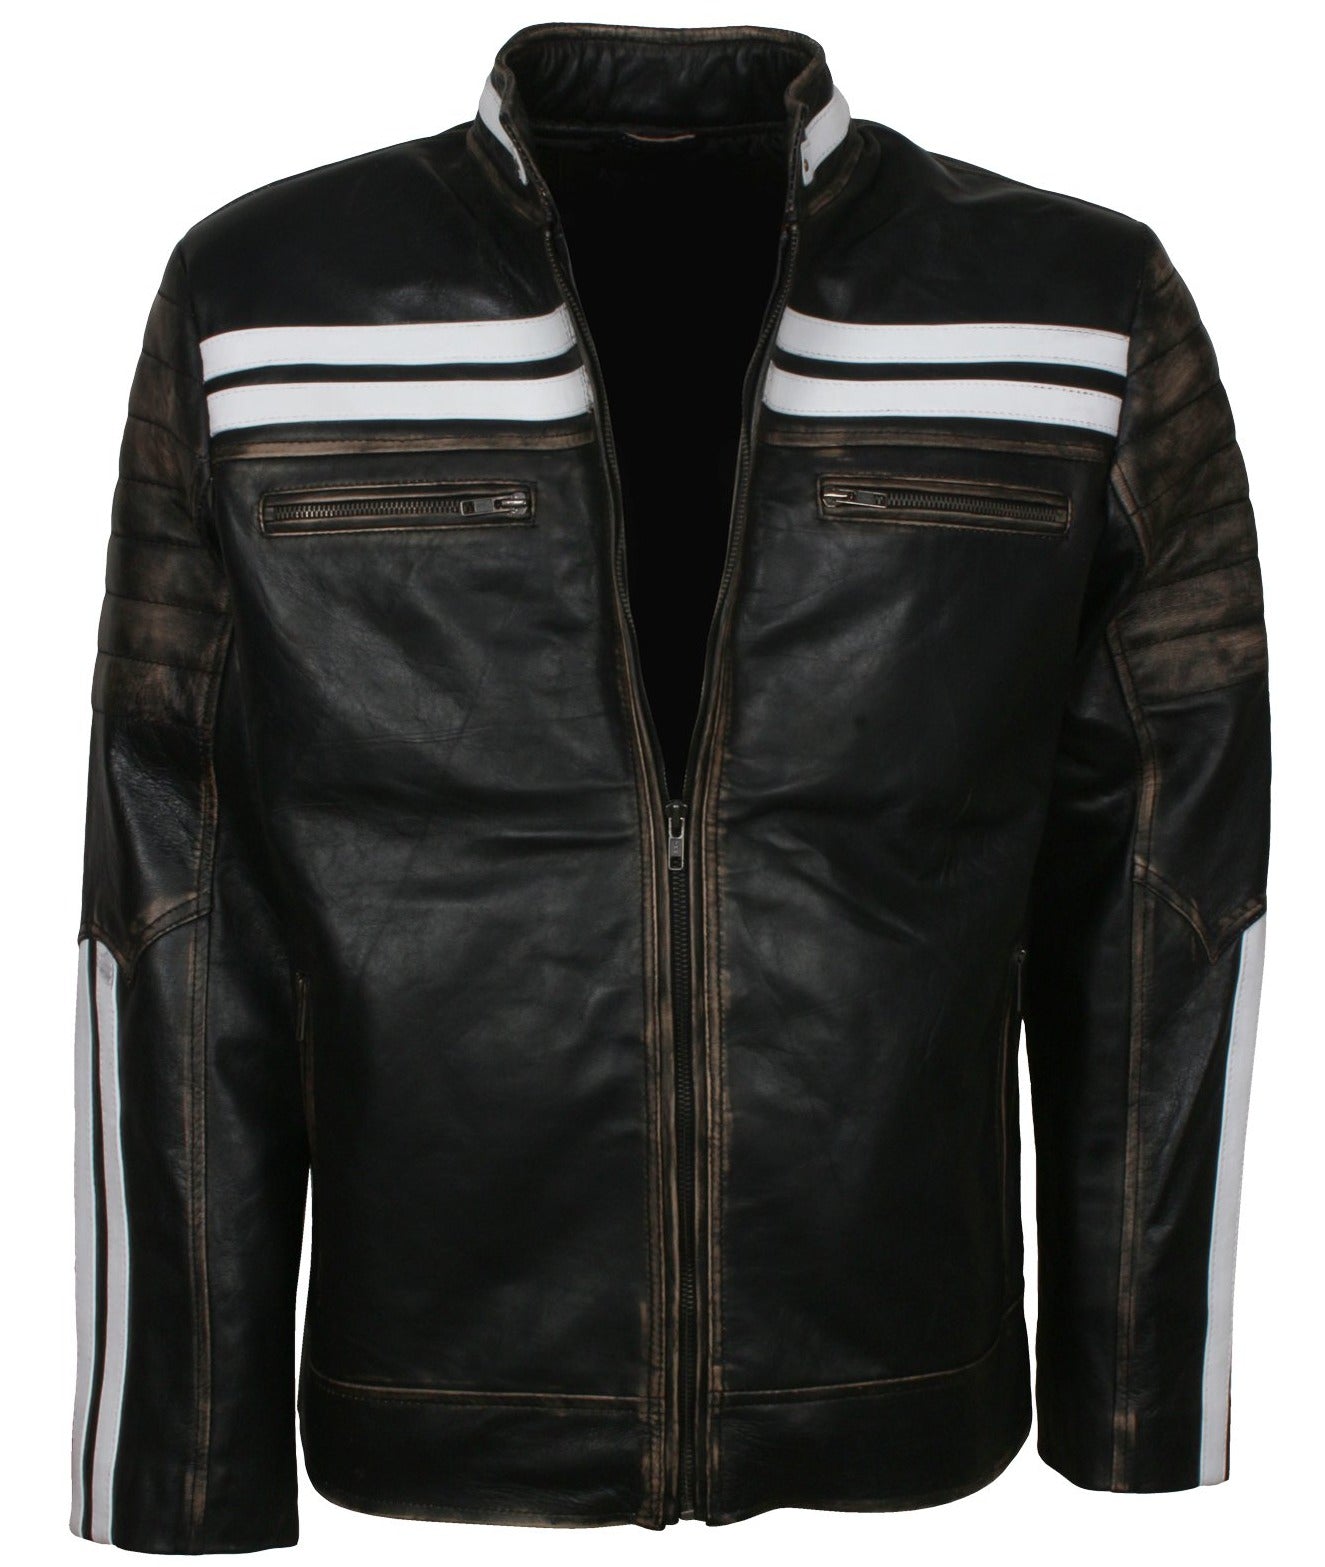 Distressed Black Leather Jacket With White Stripes – AlexGear